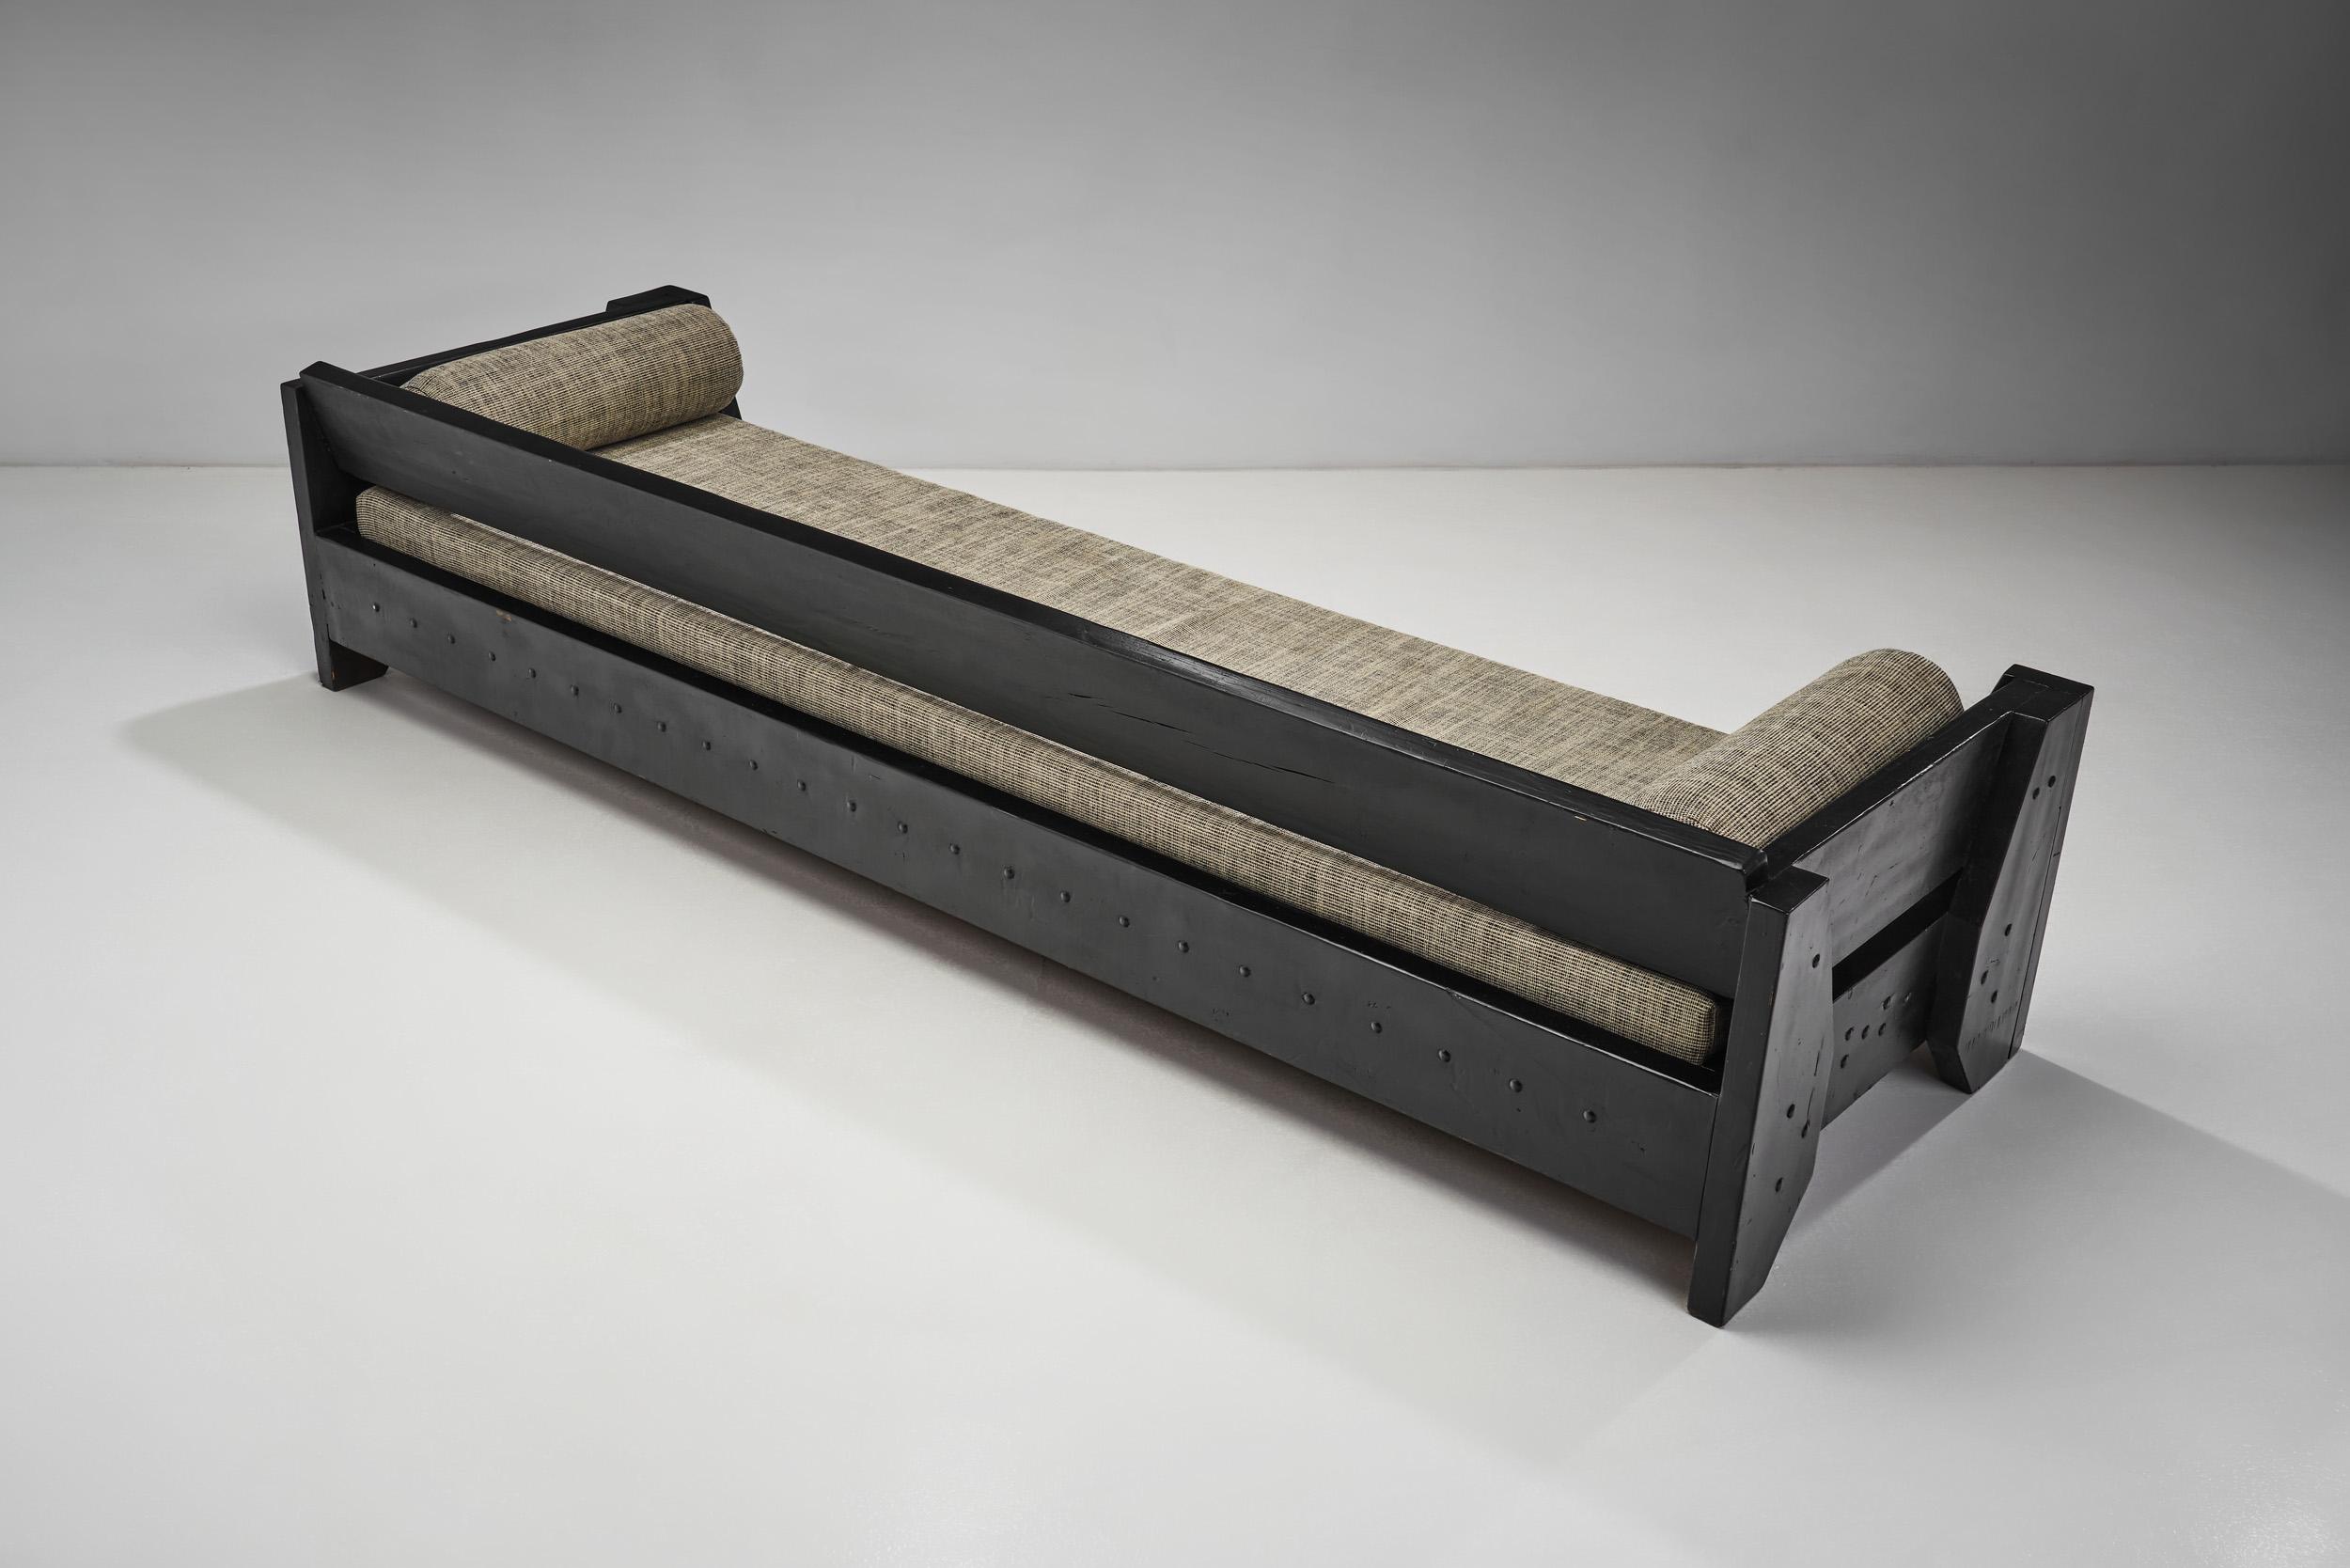 Fabric Dutch Modernist Daybed in the Bossche School Style, the Netherlands, 1960s